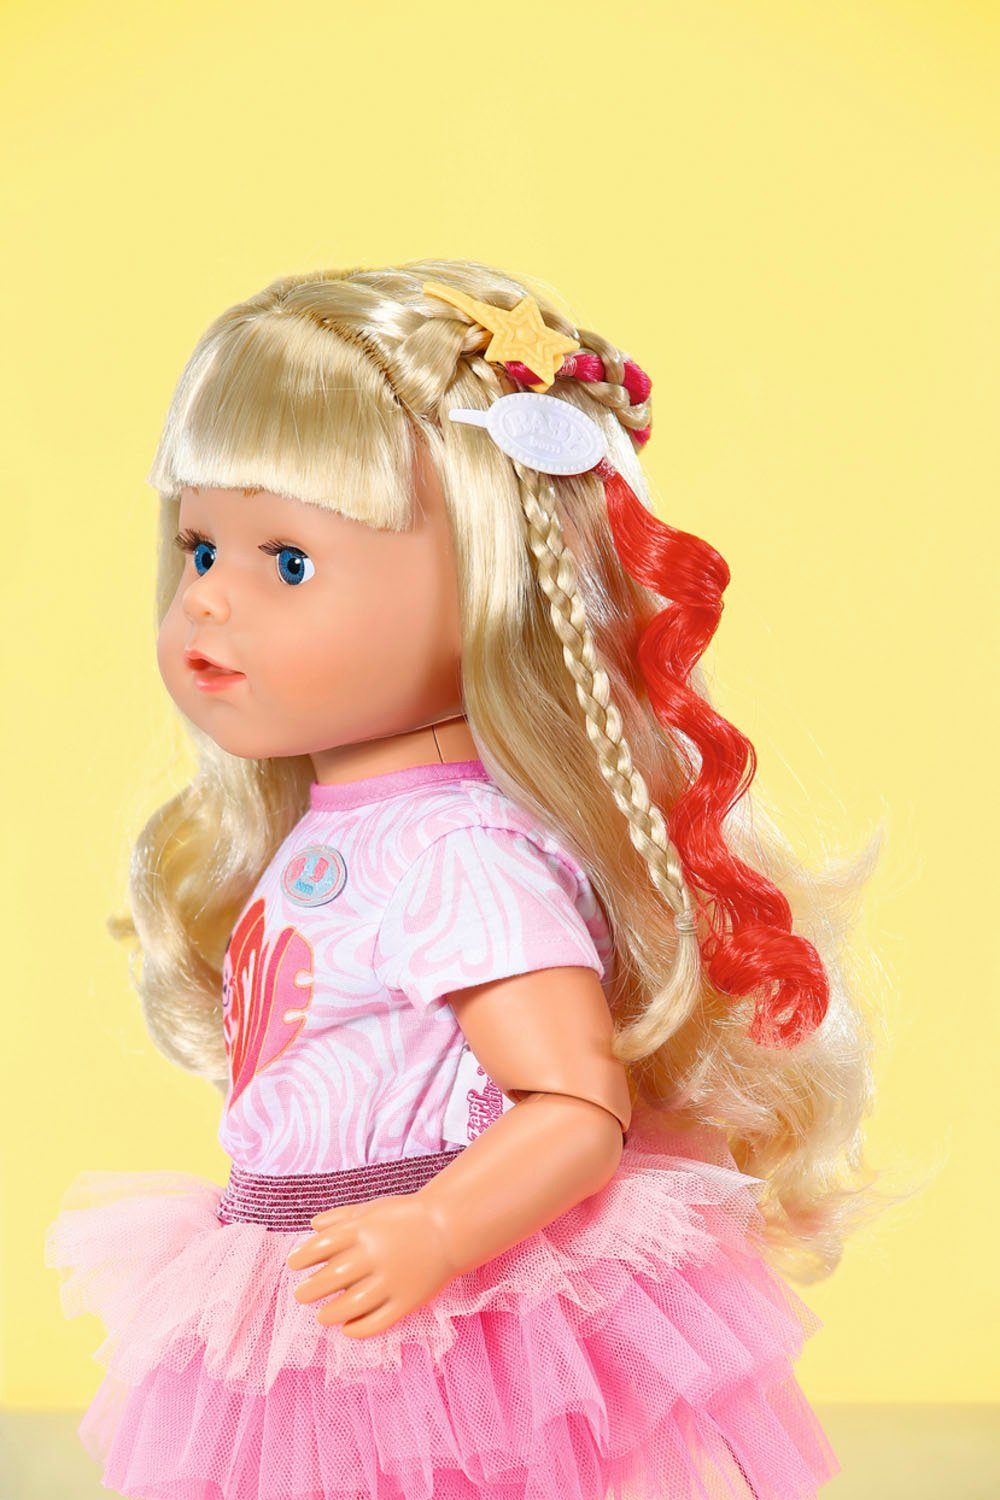 Born cm Stehpuppe Sister blond, Style&Play, 43 Baby